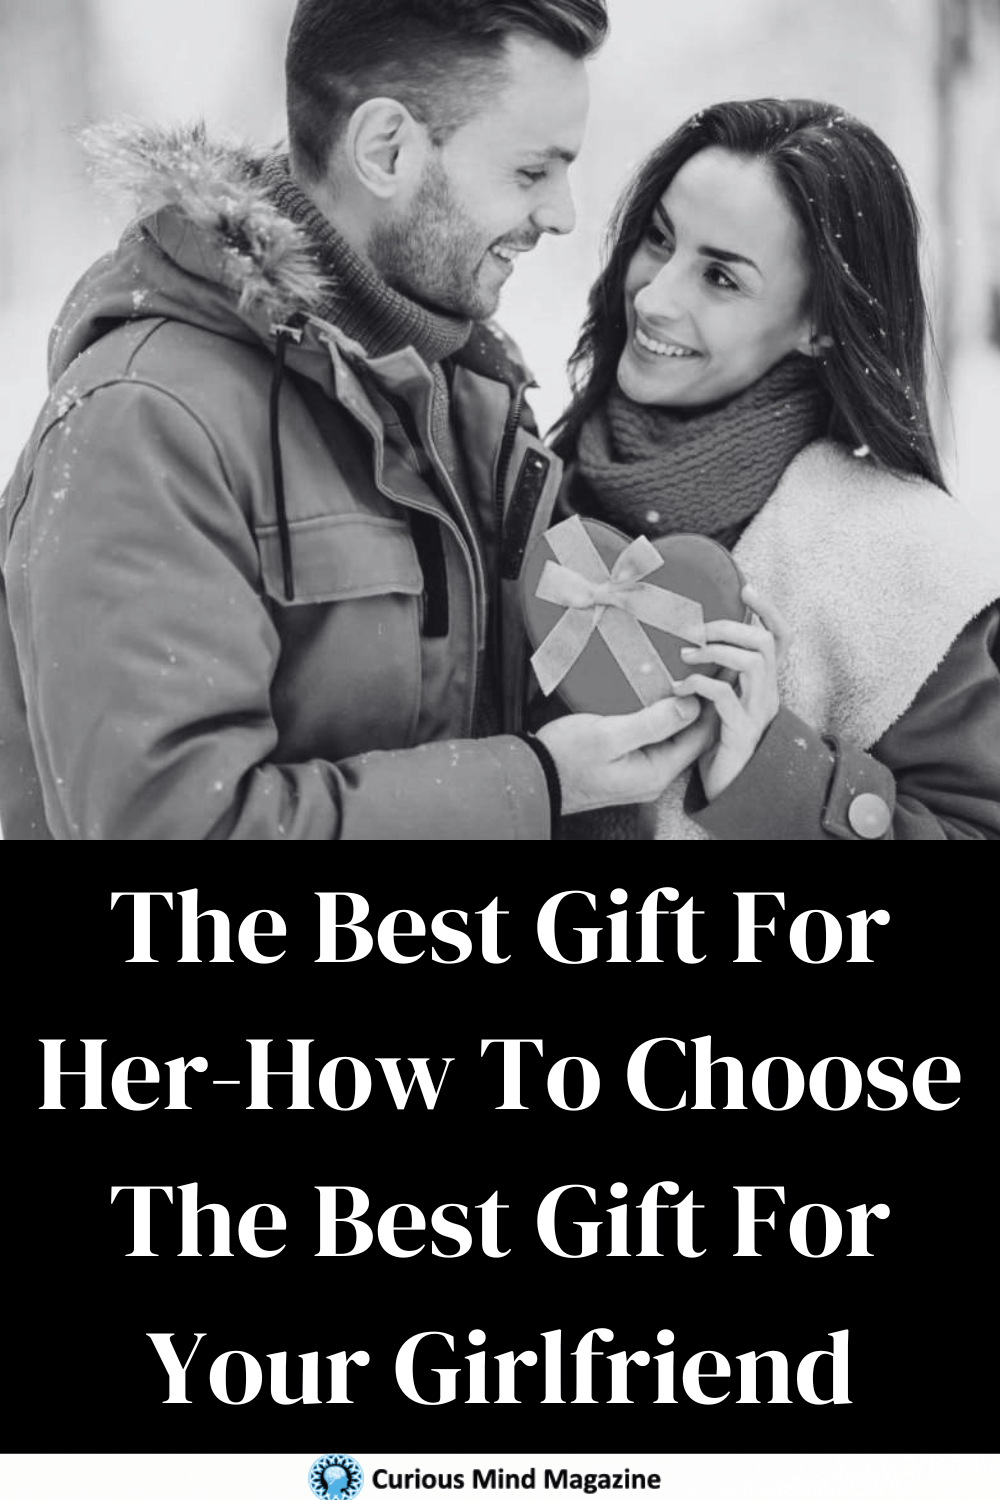 The Best Gift For Her-How To Choose The Best Gift For Your Girlfriend